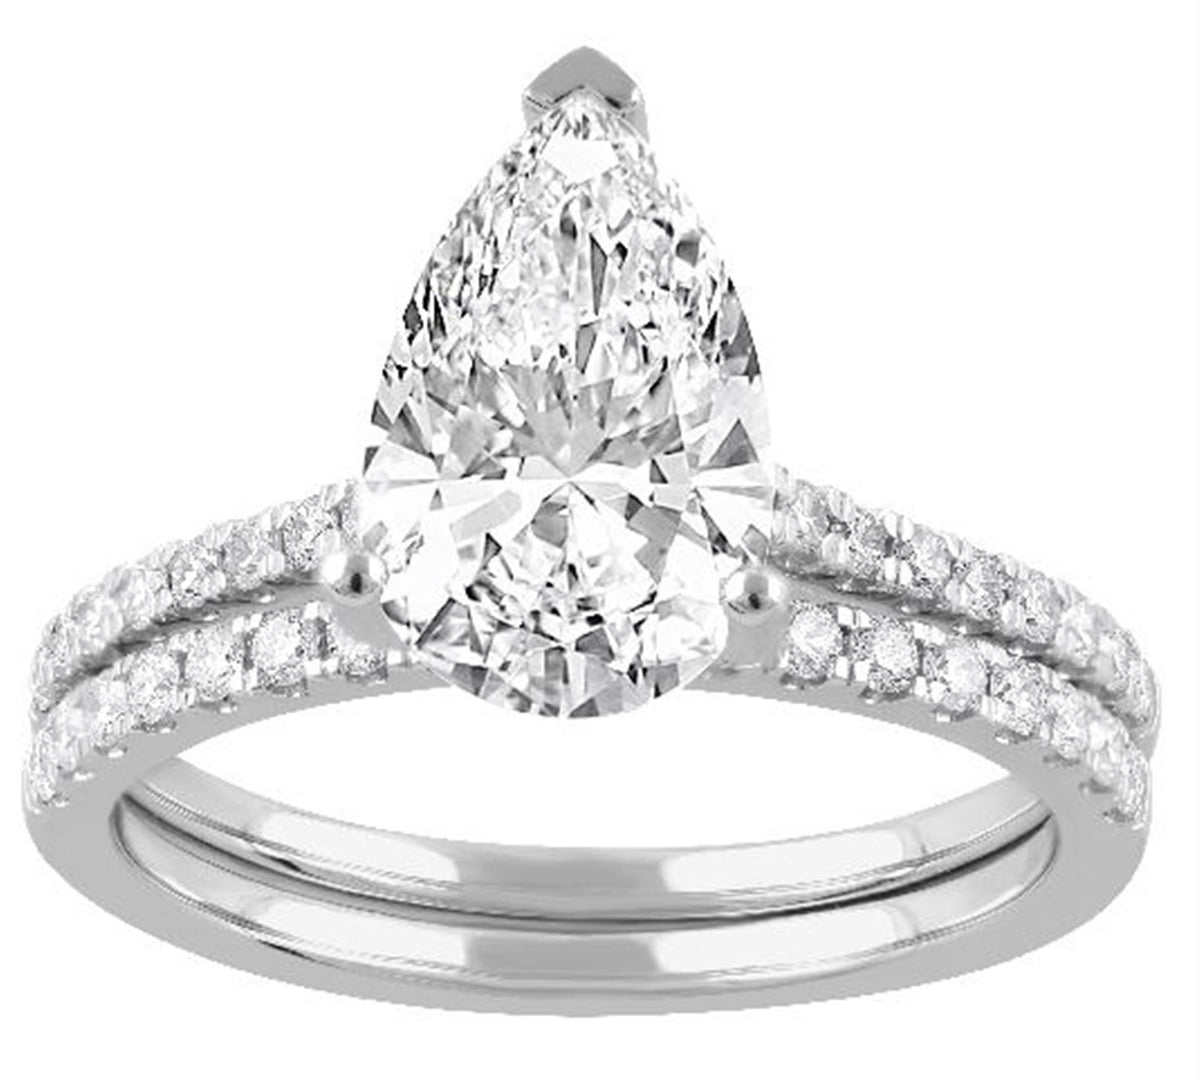 14Kt White Gold Pave Engagement And Wedding Ring Set With 3.00ct Lab-Grown Center Diamond